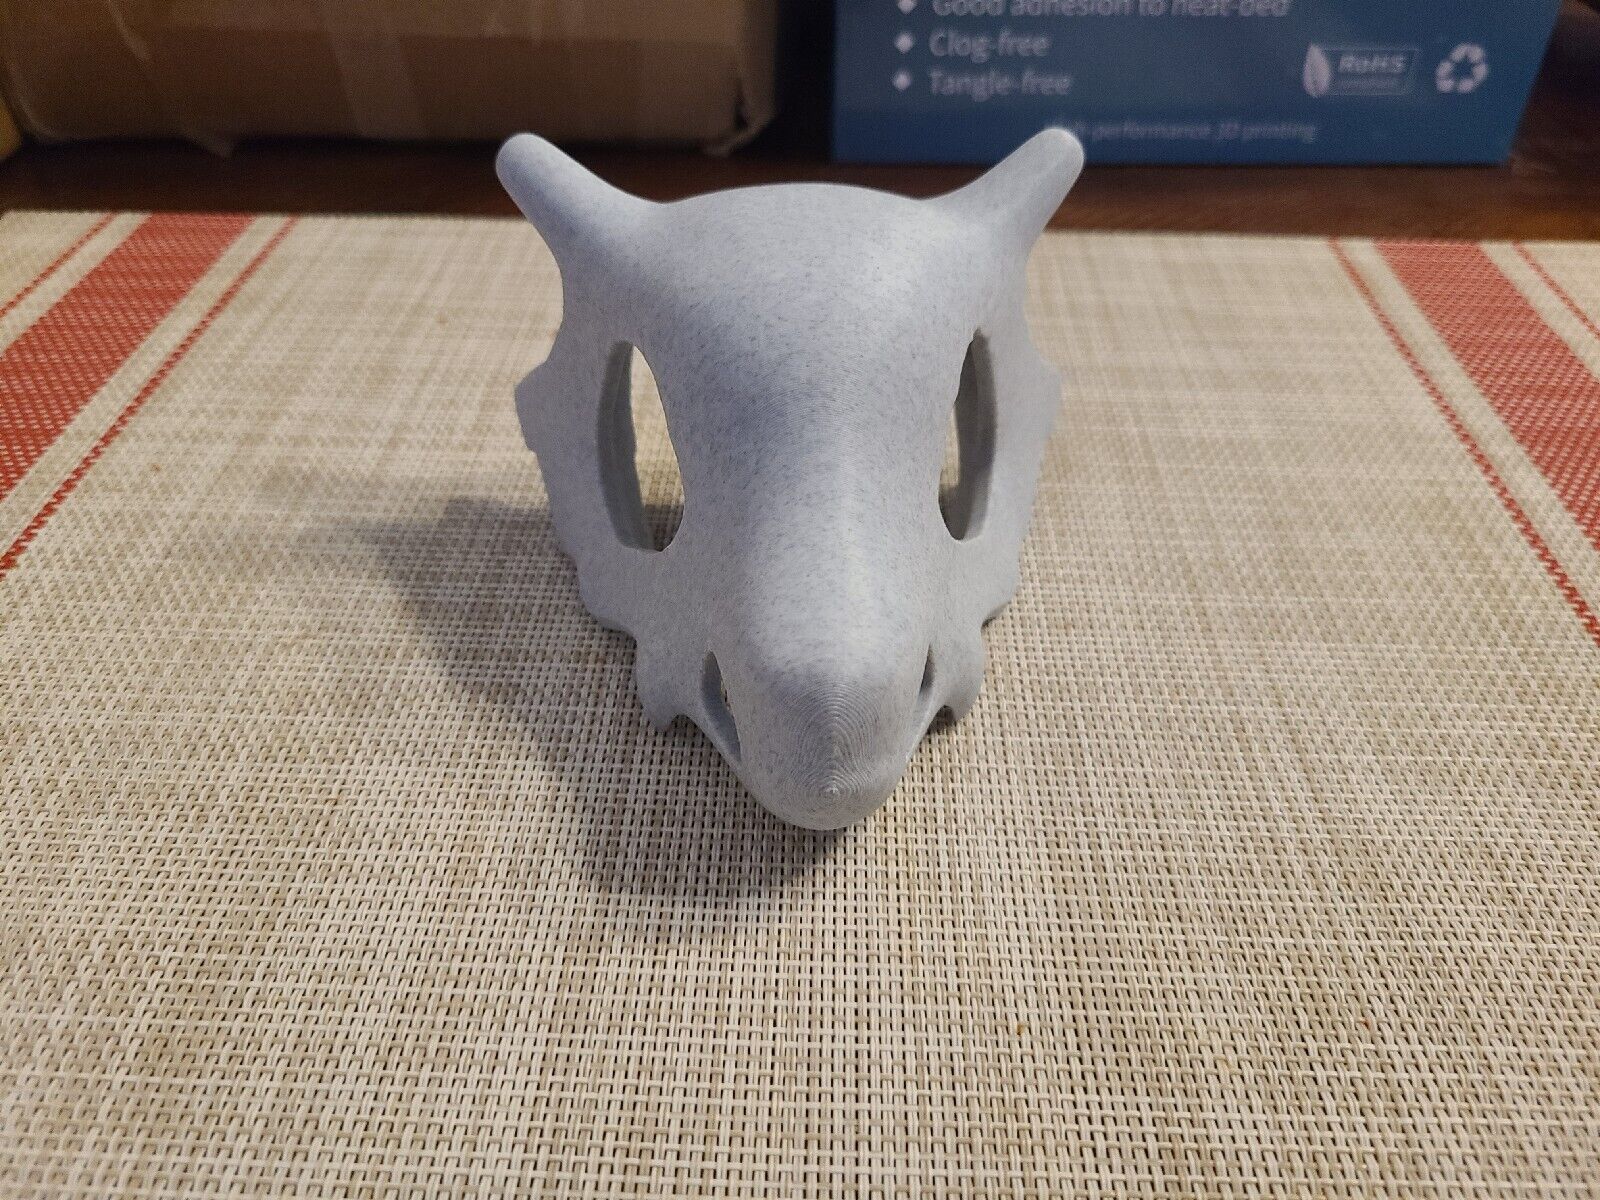 Pokemon Cubone Skull Desk Decoration 3D Printed 4 Inches Long 3 Inches Tall 4x3